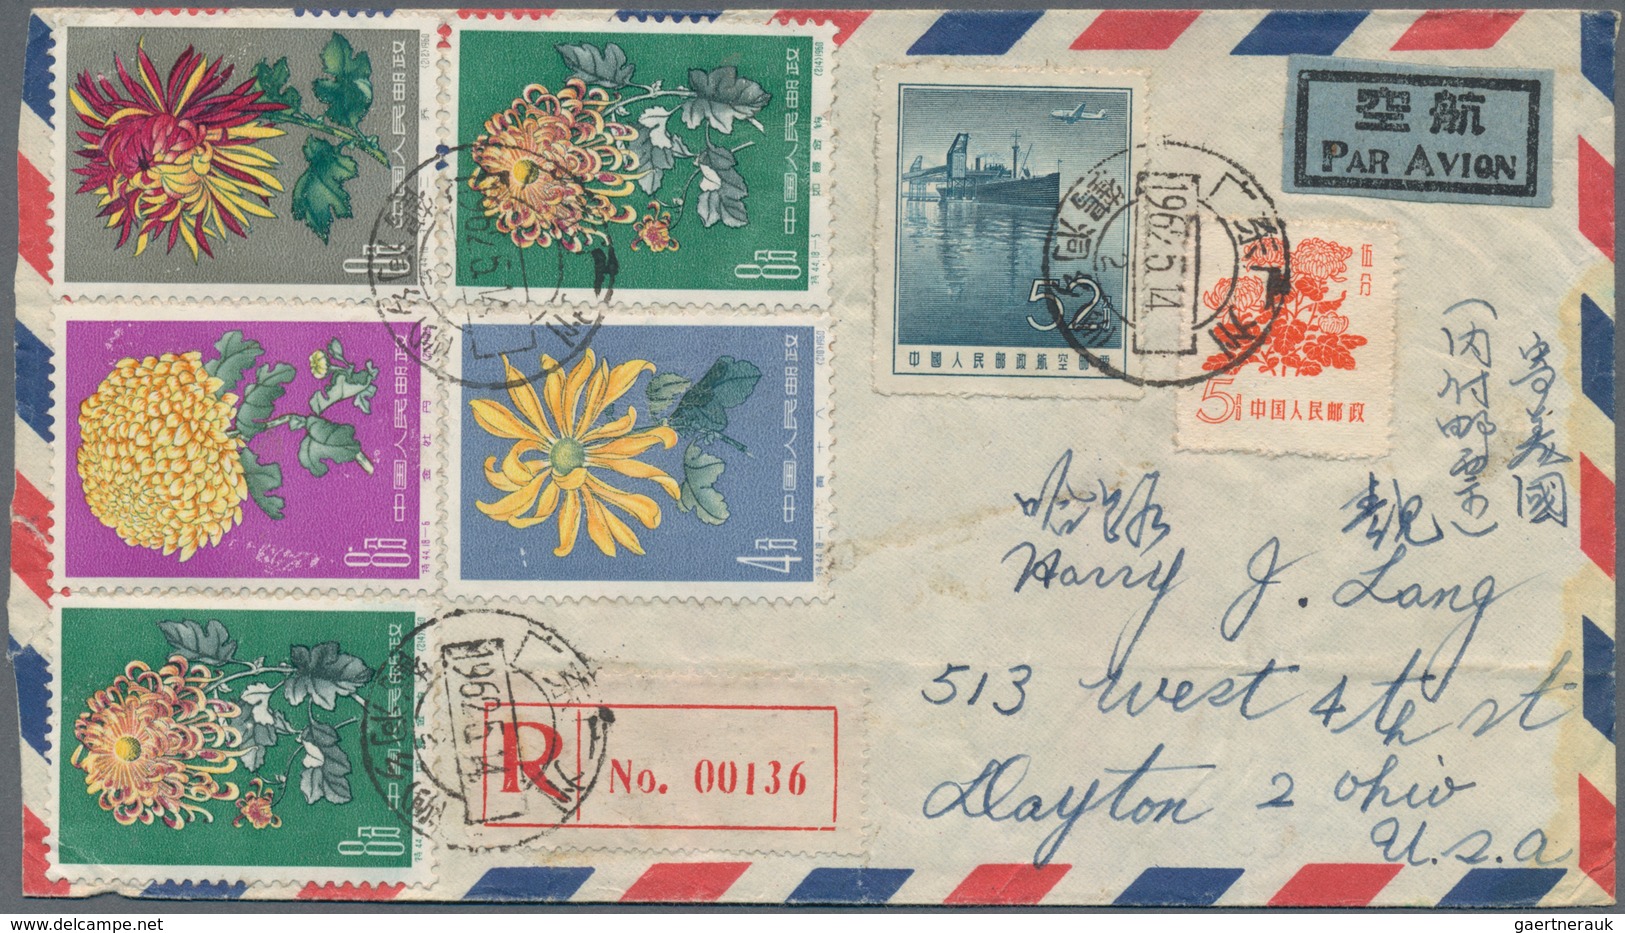 China - Volksrepublik: 1962/65, covers (4 inc. 1 card) to Austria, USA 82) and Switzerland, the lett